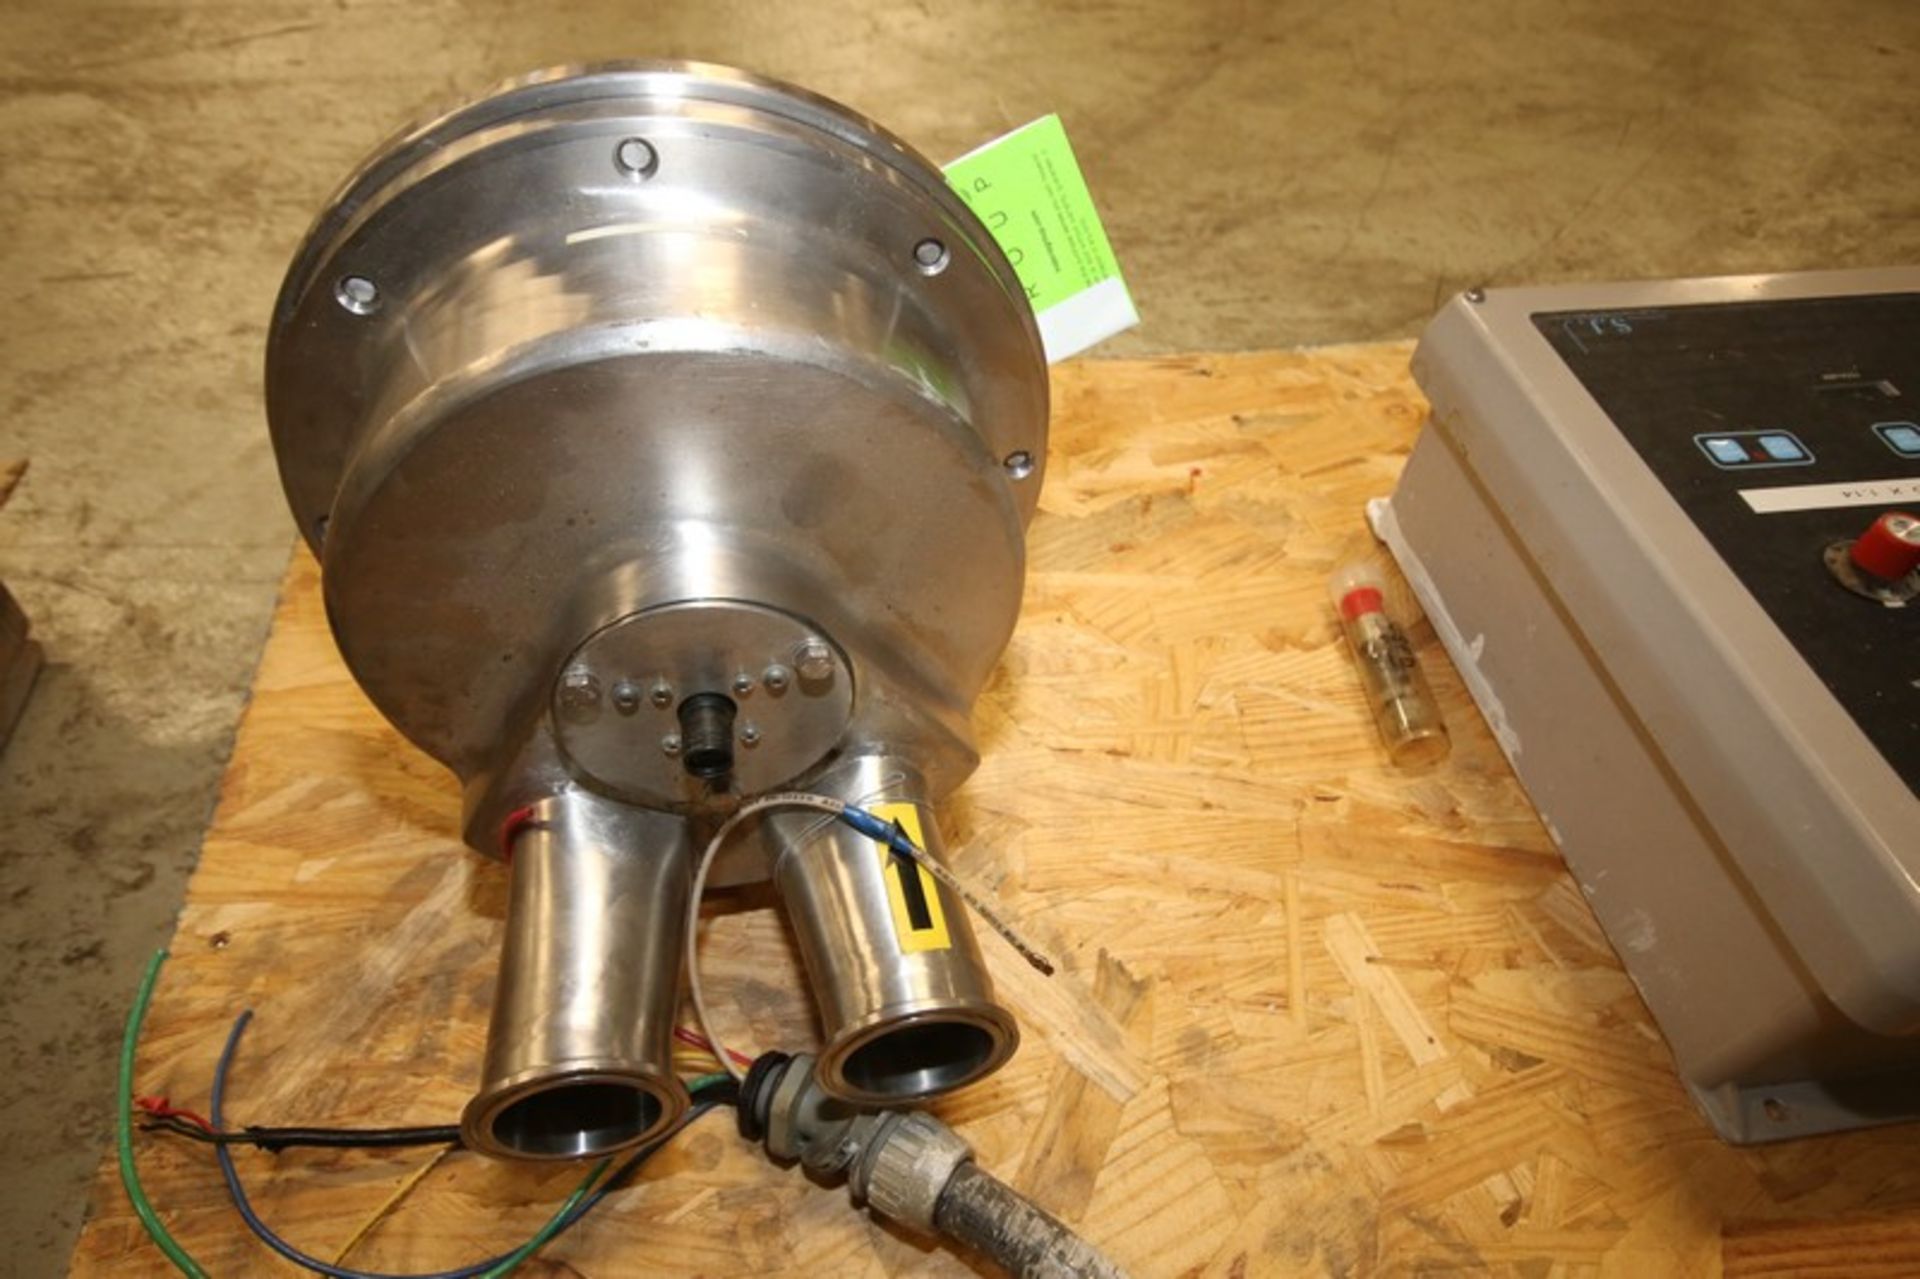 Accurate Metering System 2" CT Flow Meter with Read-Out (INV#101791) (Located @ the MDG Auction - Image 3 of 5